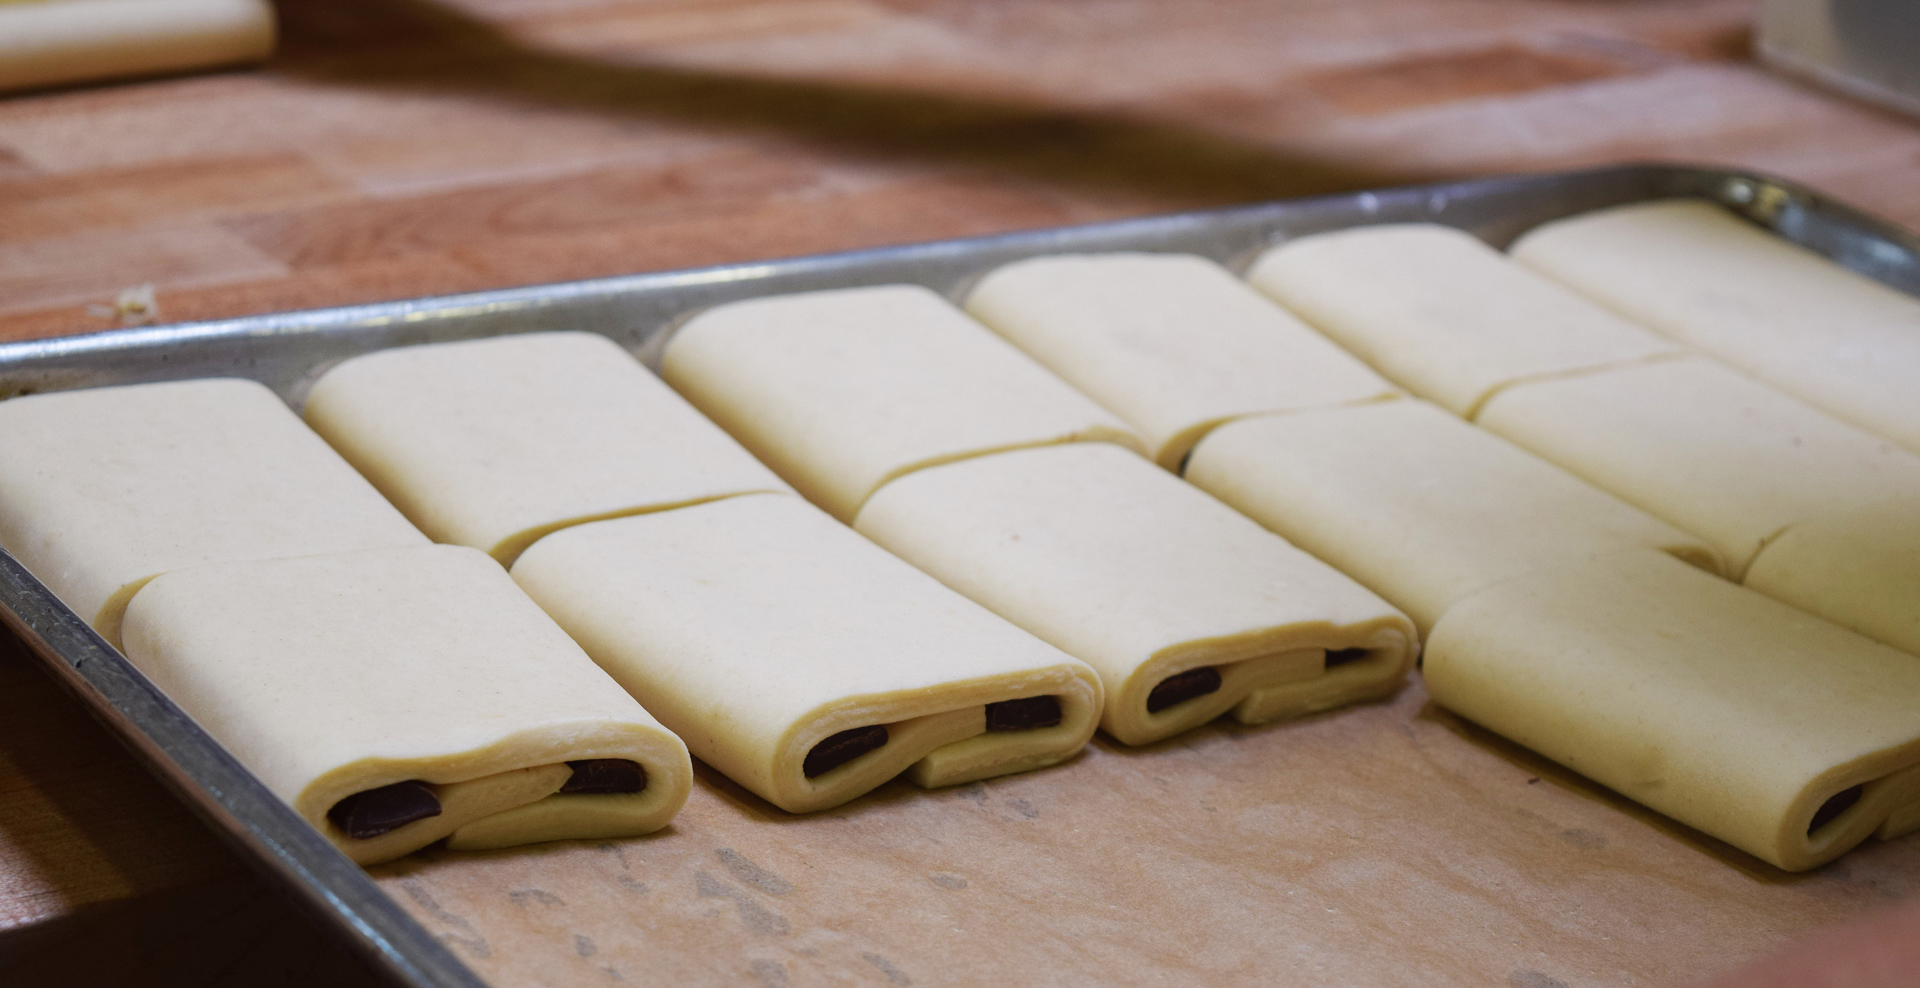 Croissants stuffed with chocolate await their time in the oven.